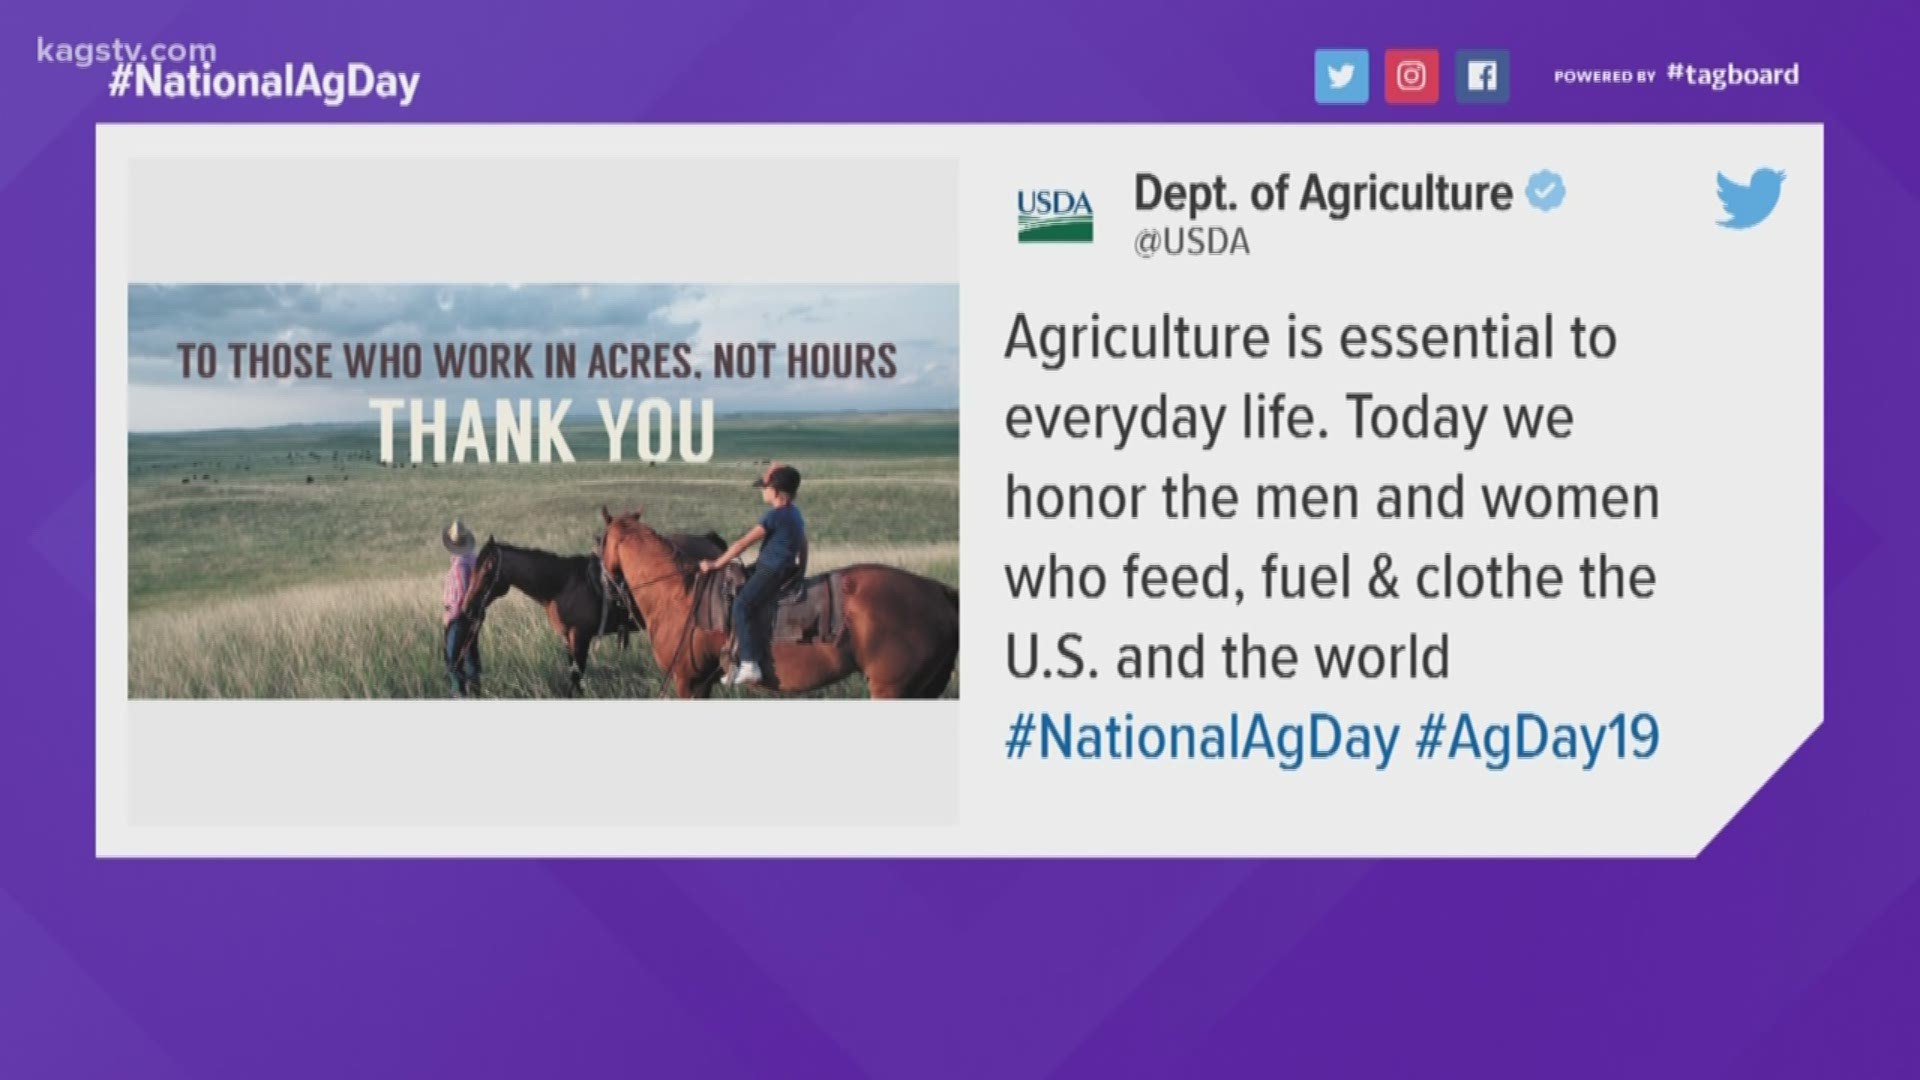 To all the Aggies and farmers out there, we wanted to send this special thanks from KAGS.